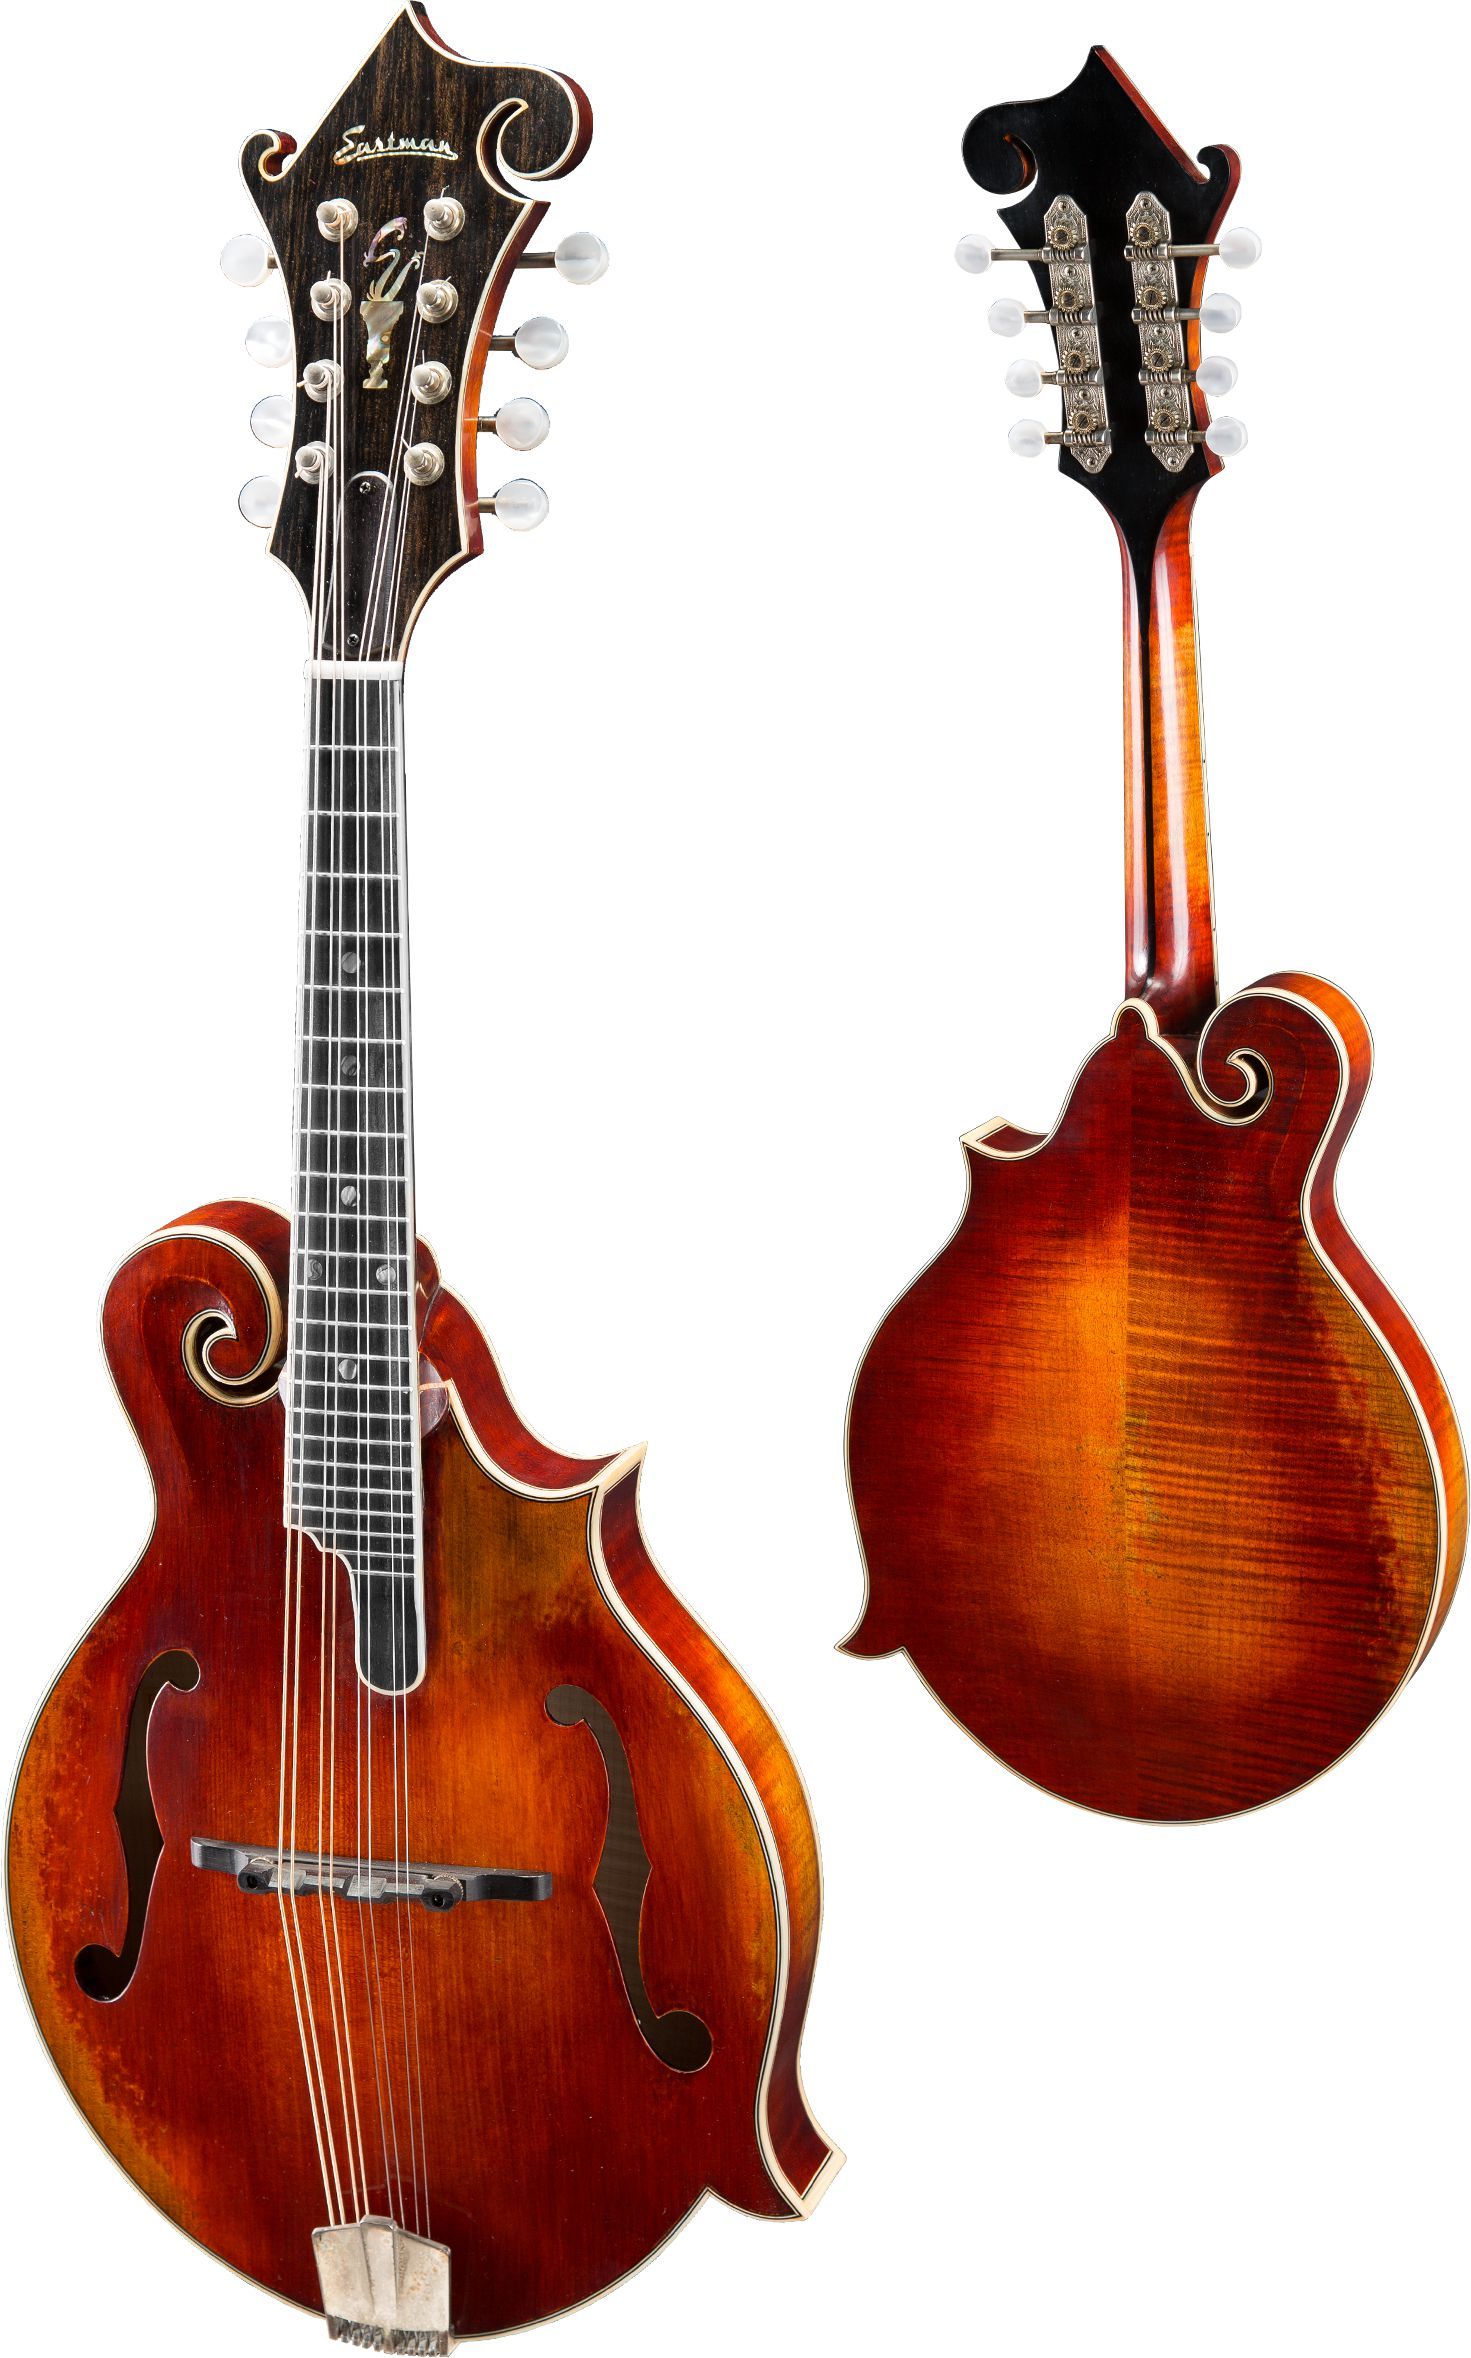 Eastman MD815/v Antique Classic varnish Mandolin (F-style F-holes, Solid Spruce top, Solid Maple back and sides, w/Case), Mandolin for sale at Richards Guitars.